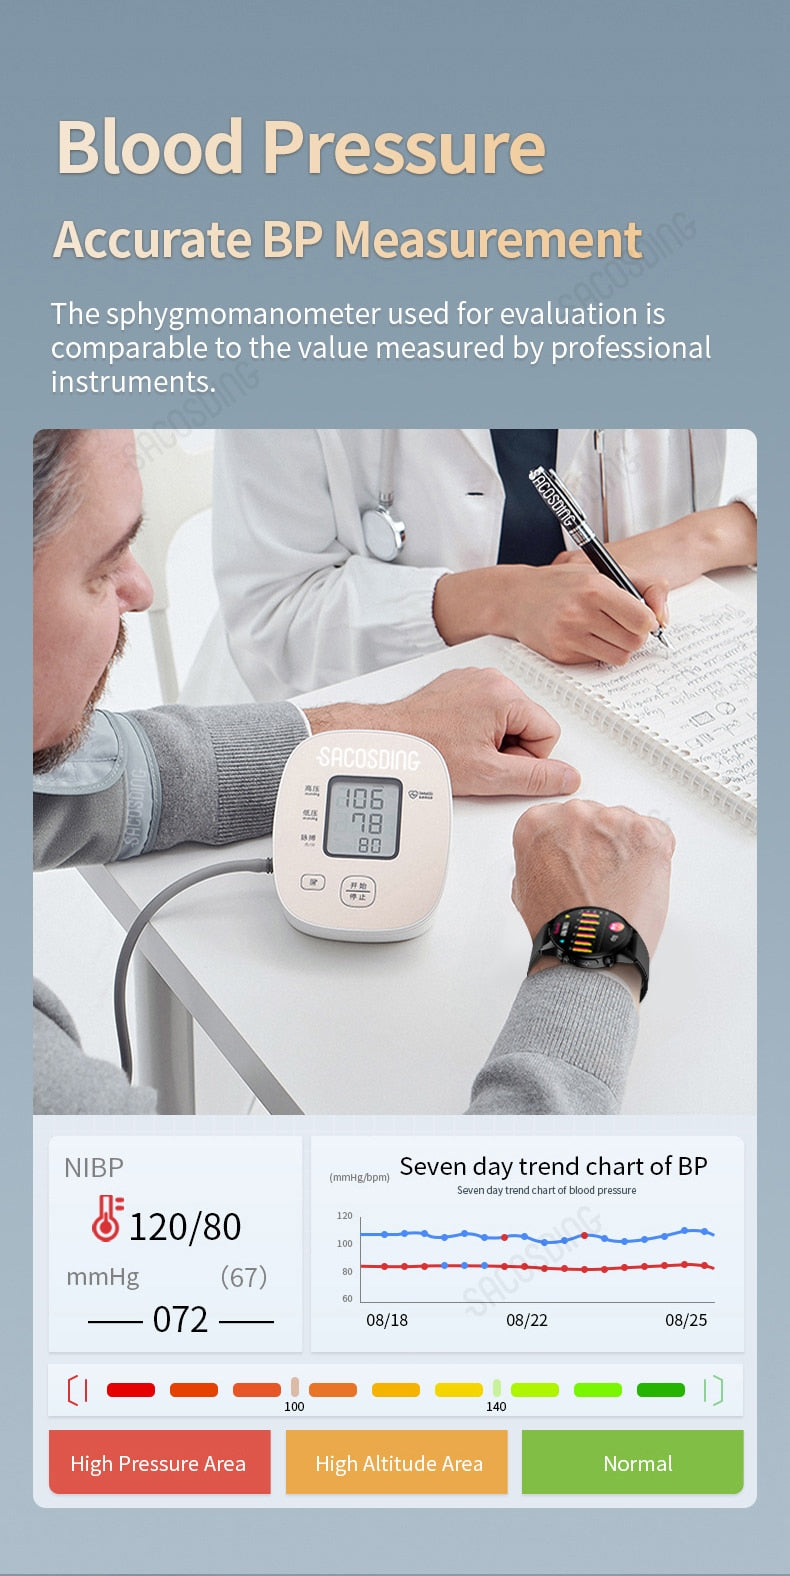 ECG Watch Pro™ with AFib detection